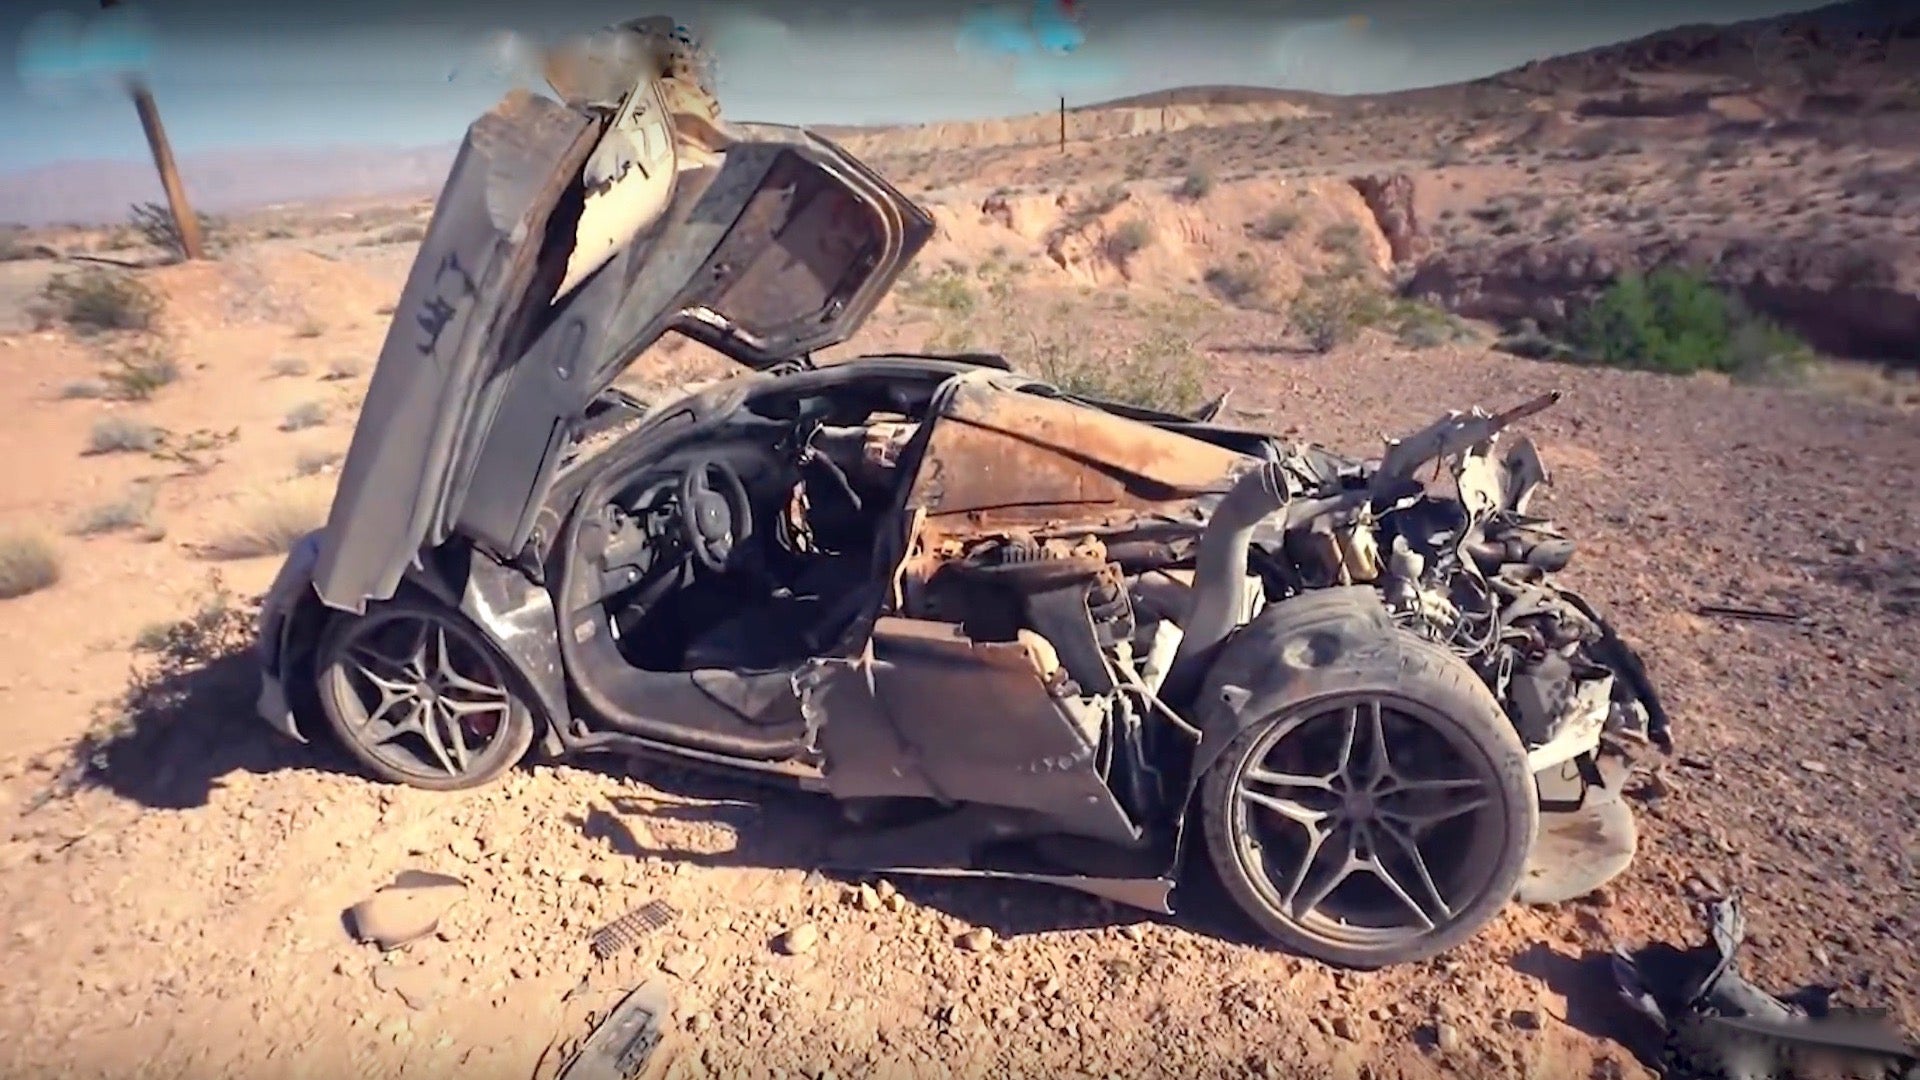 Lucky Road Rally Participants Survive Brutal, High-Speed Crash in a McLaren 720S